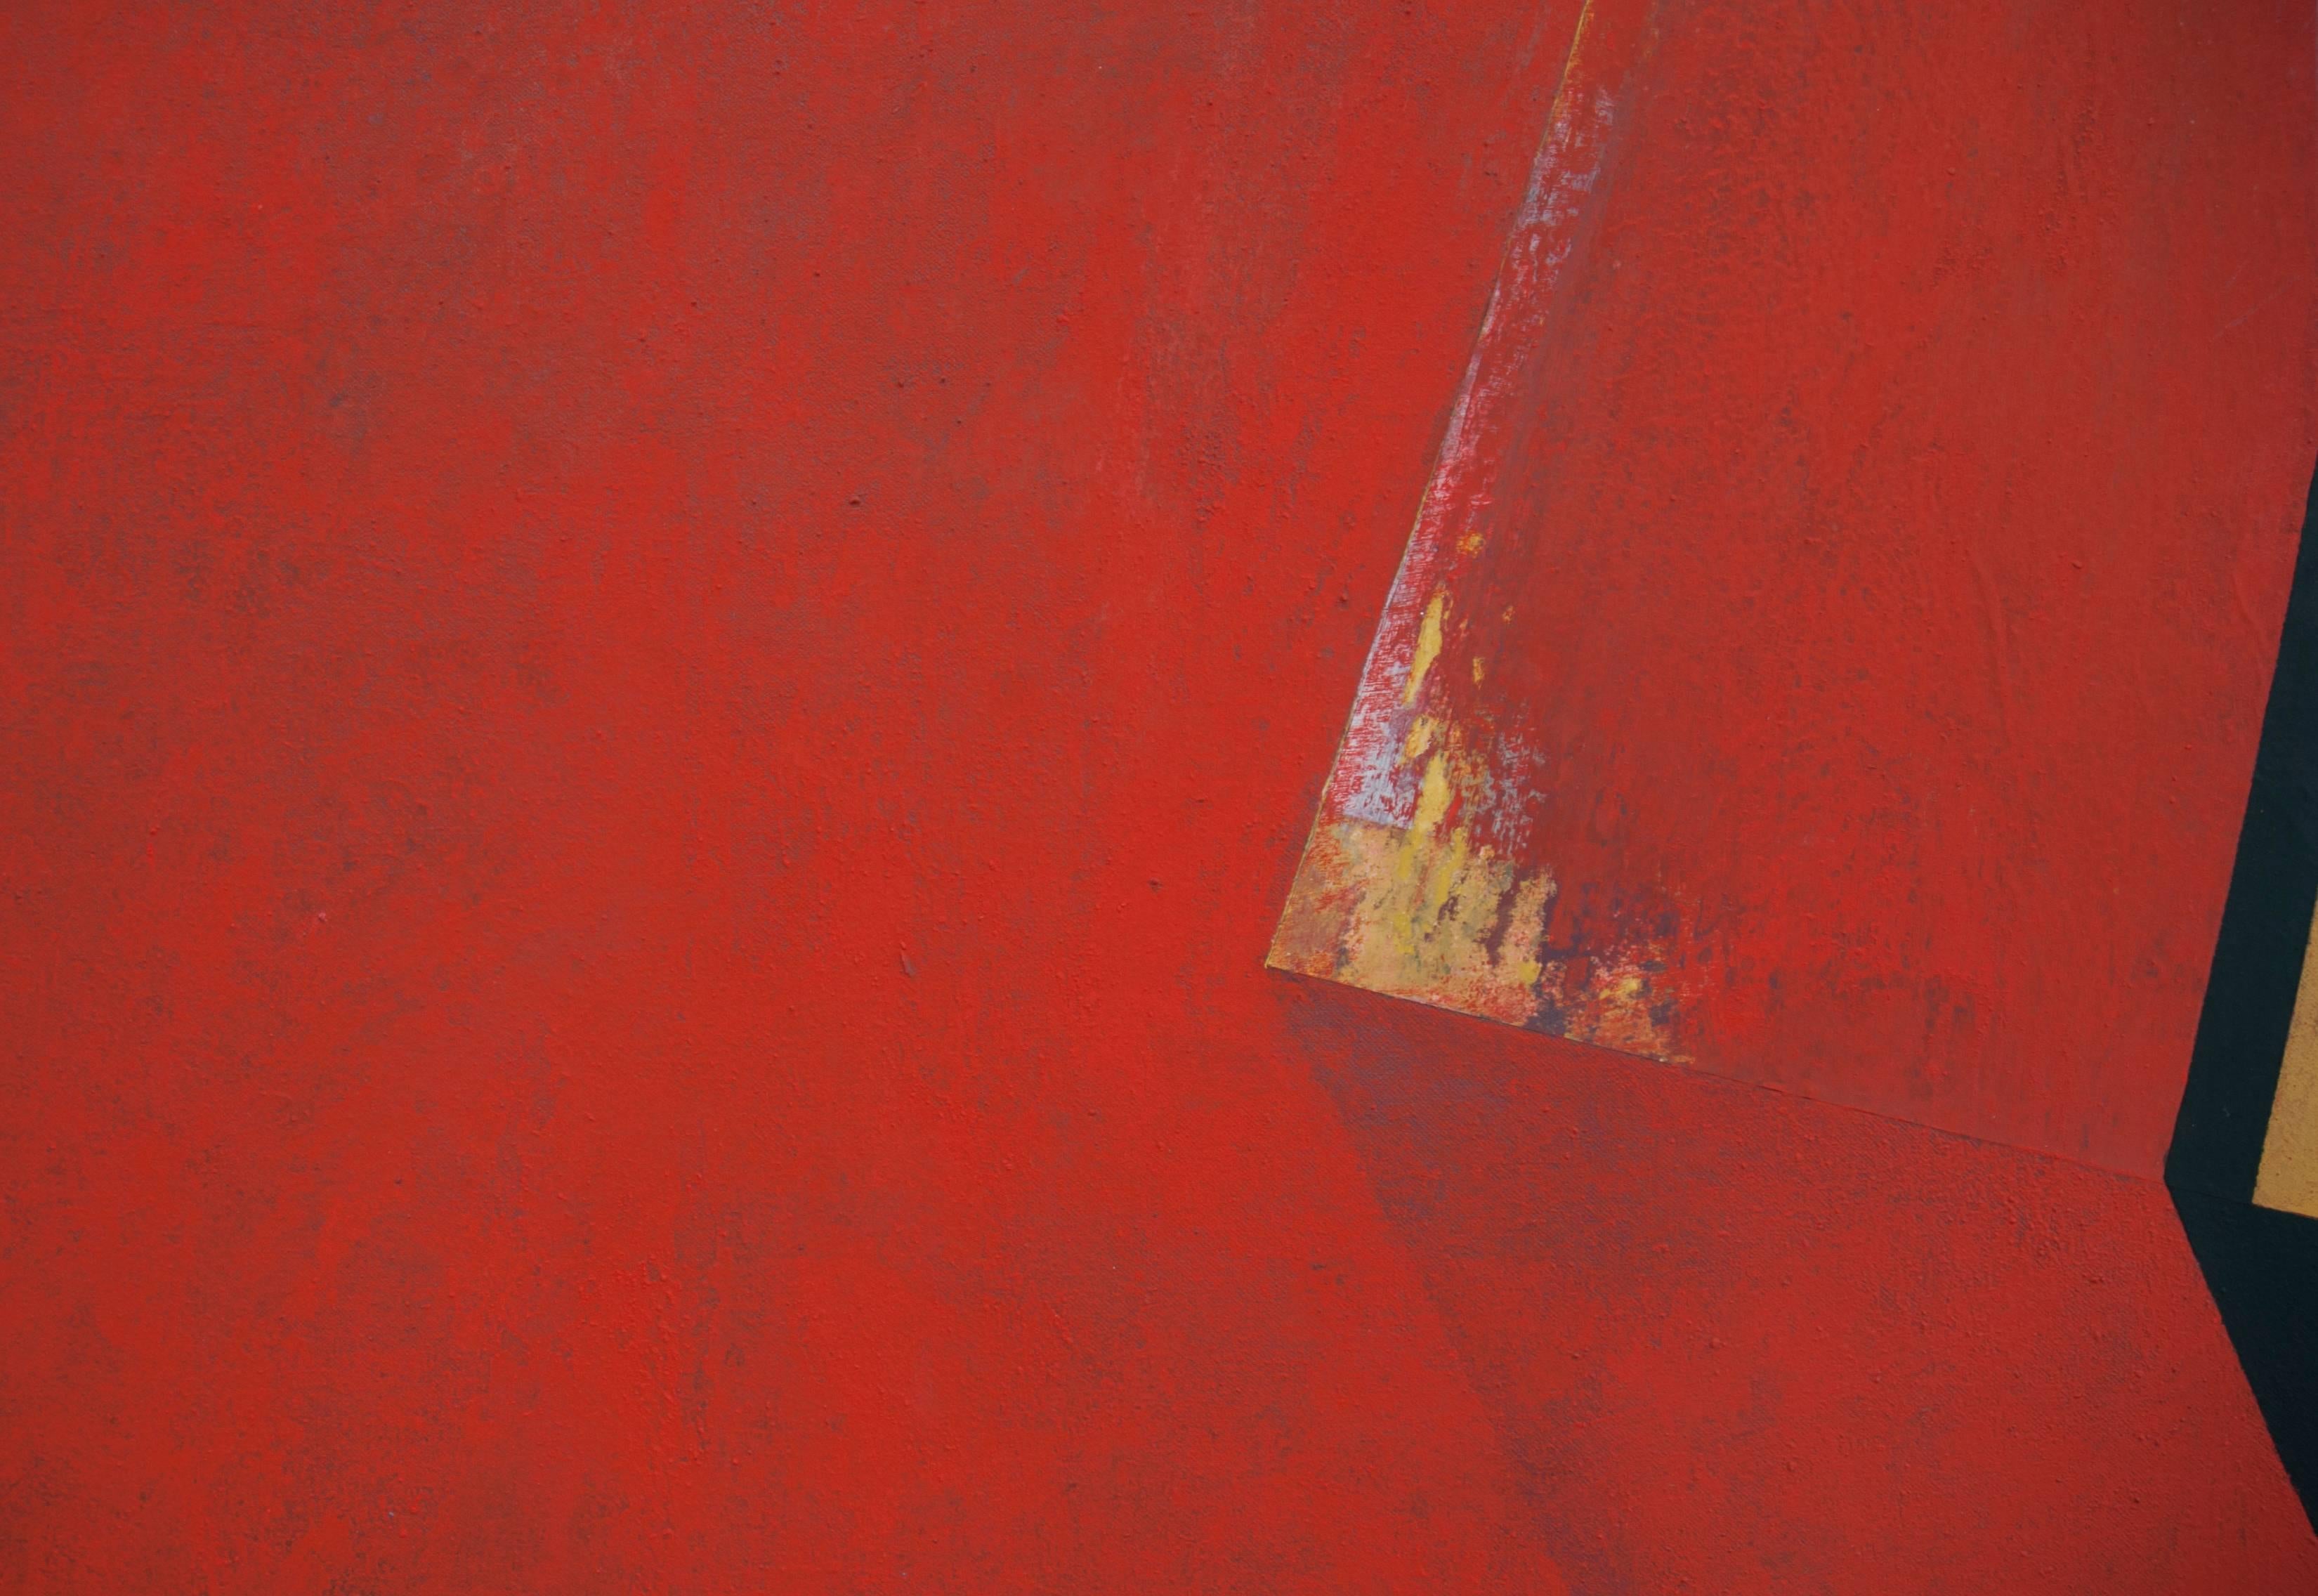 Through the Red: Large Abstract Hard Edge Painting on Canvas by Silvia Lerin For Sale 6